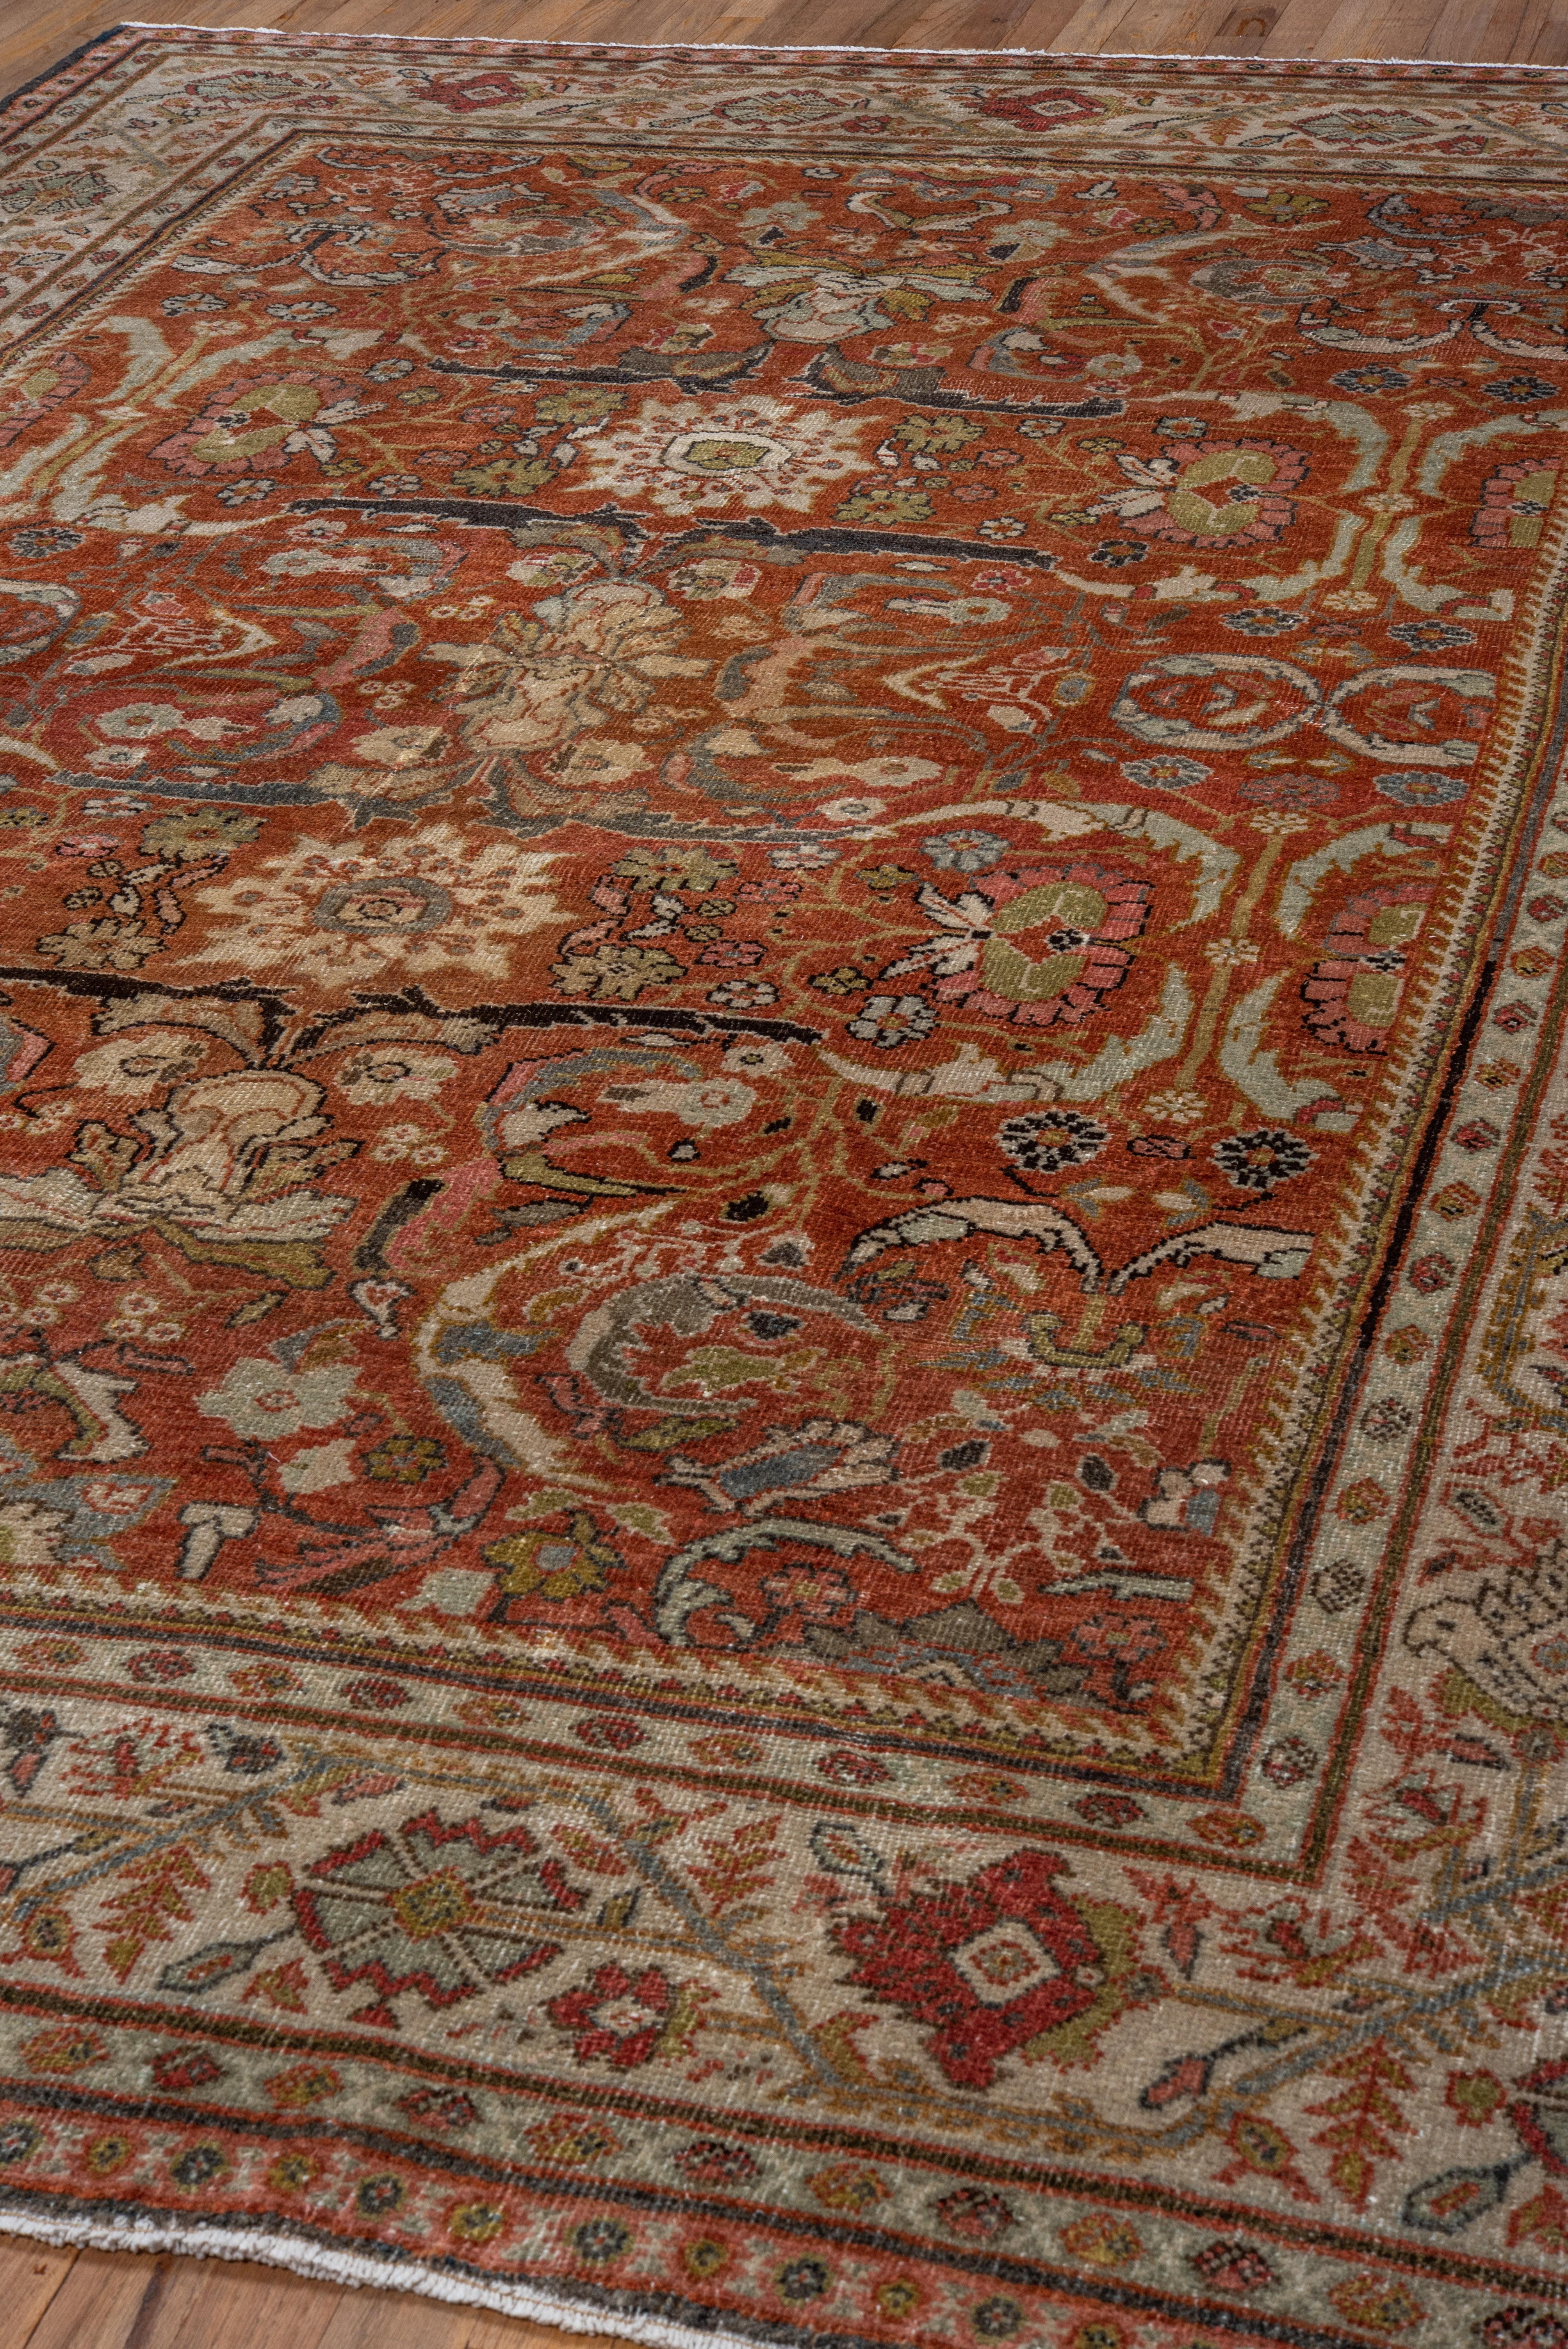 Early 20th Century Antique Persian Mahal Rug, Rust Field, circa 1920s